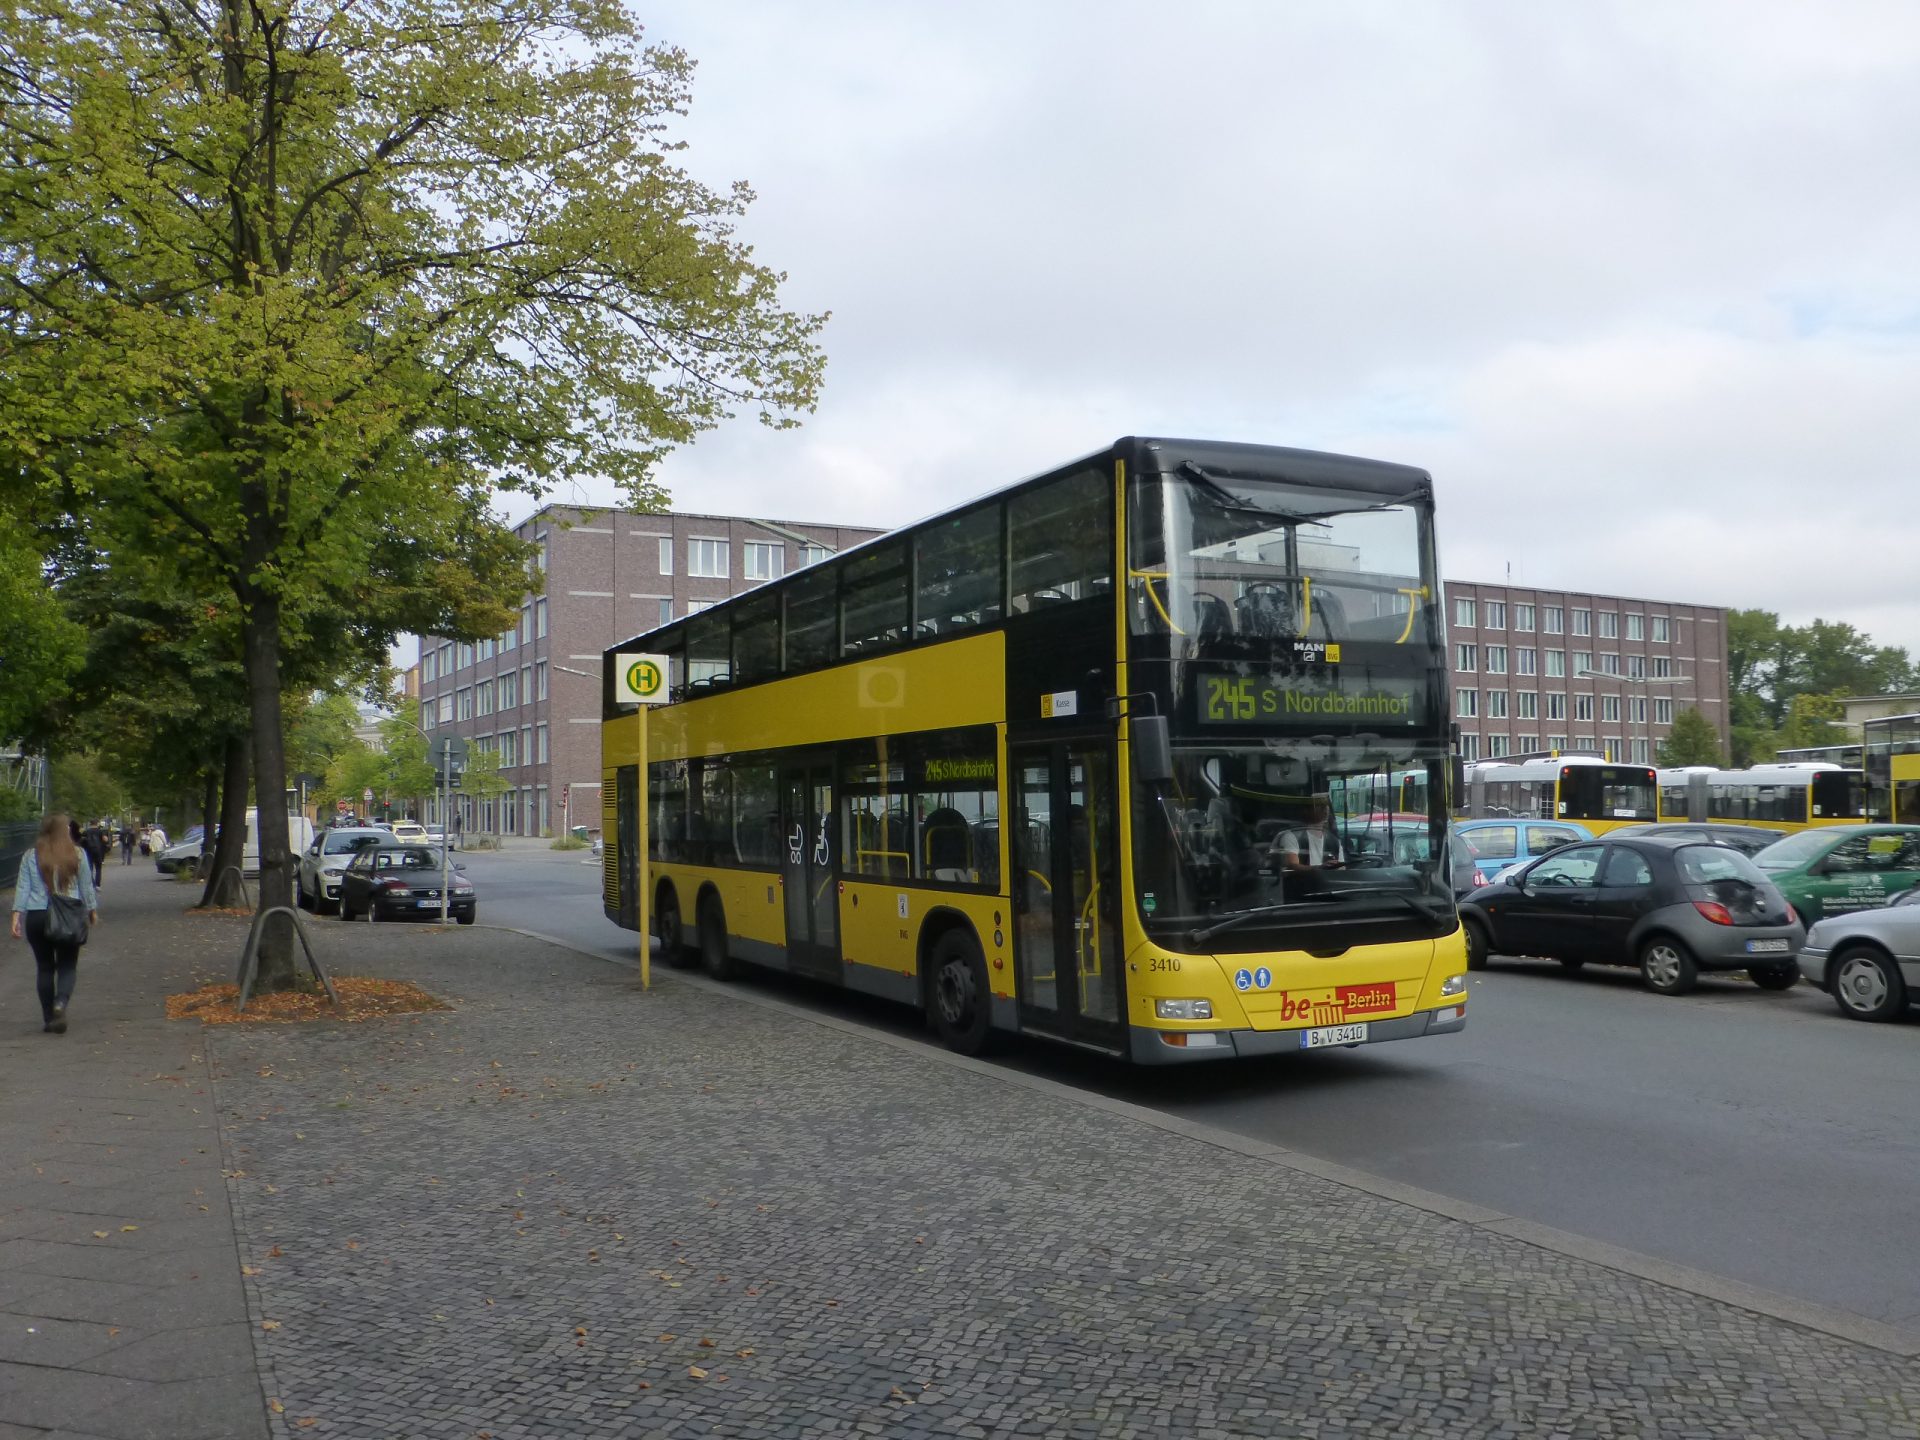 Bus 200 in Berln (Leif Jørgensen, CC-By-SA-4.0) Link zur Lizenz: https://creativecommons.org/licenses/by-sa/4.0/deed.en